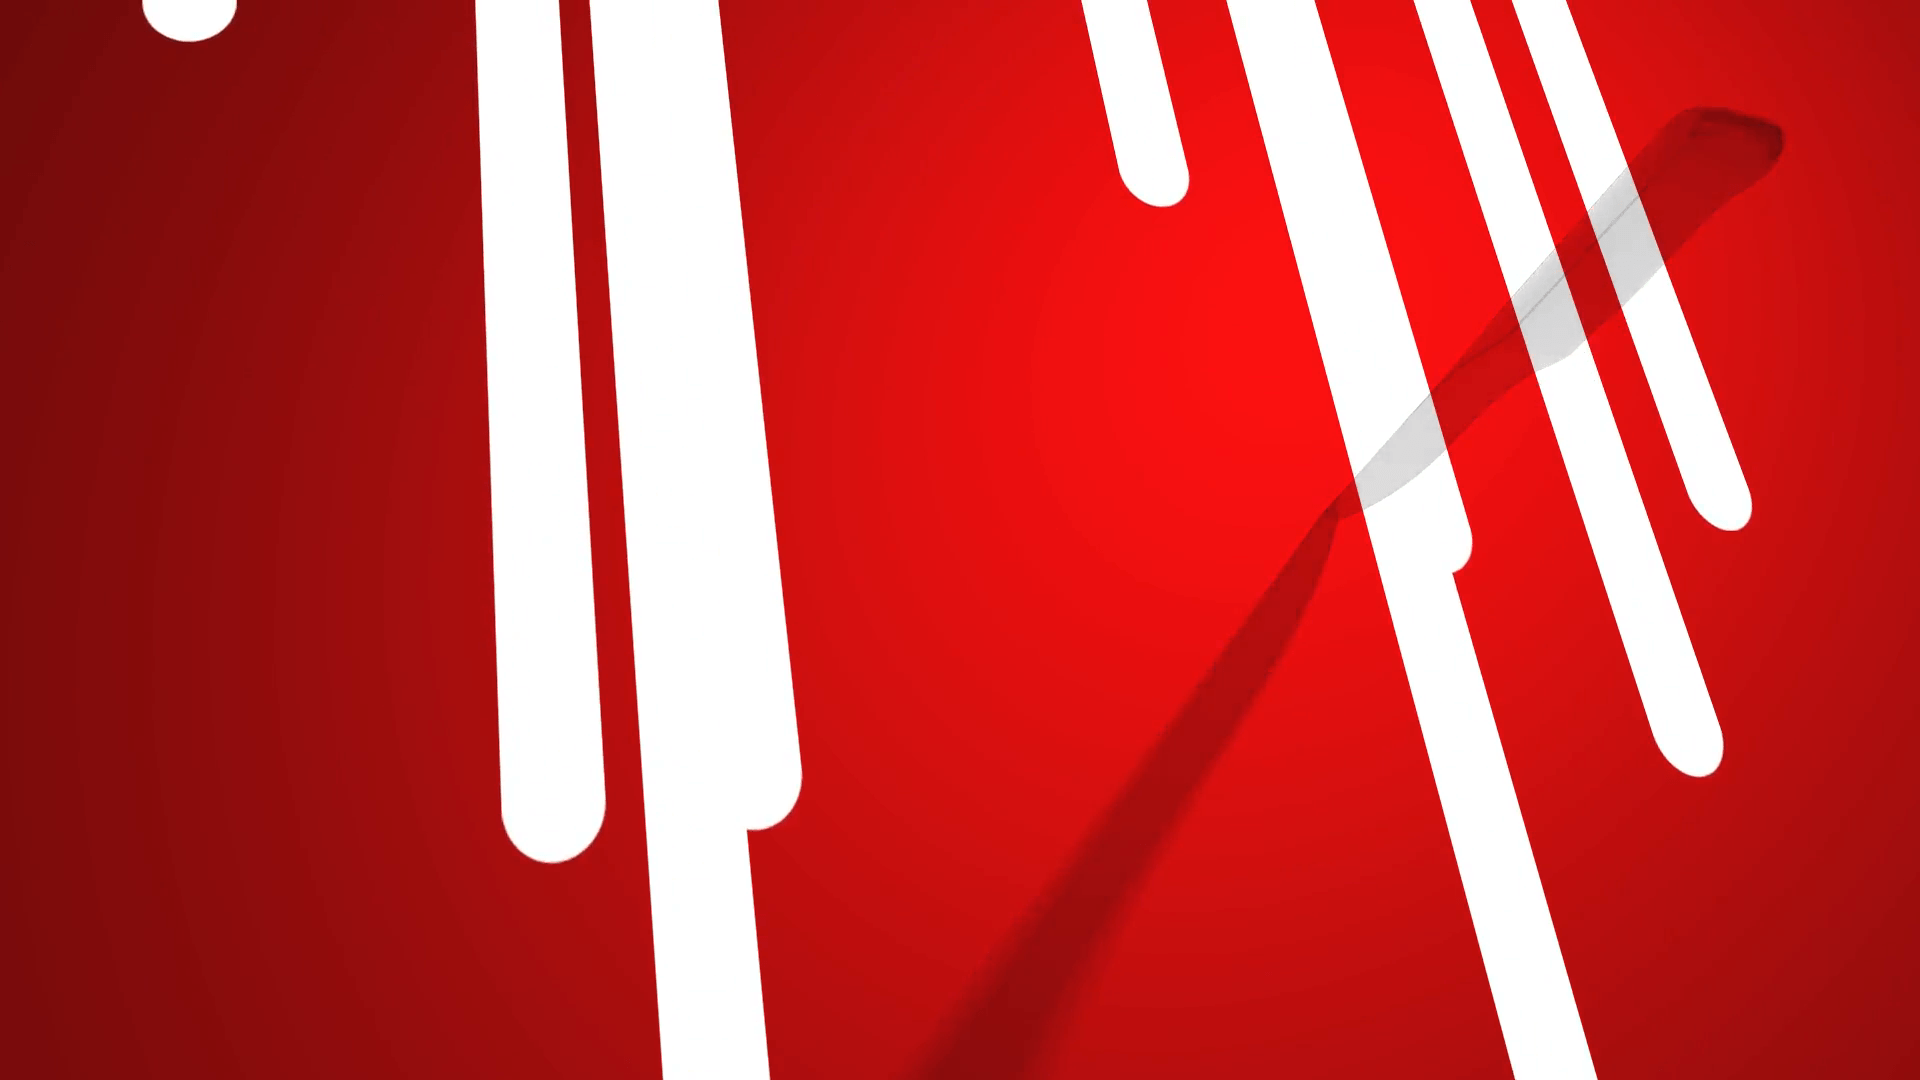 High definition animation of a knife falling and hitting an abstract